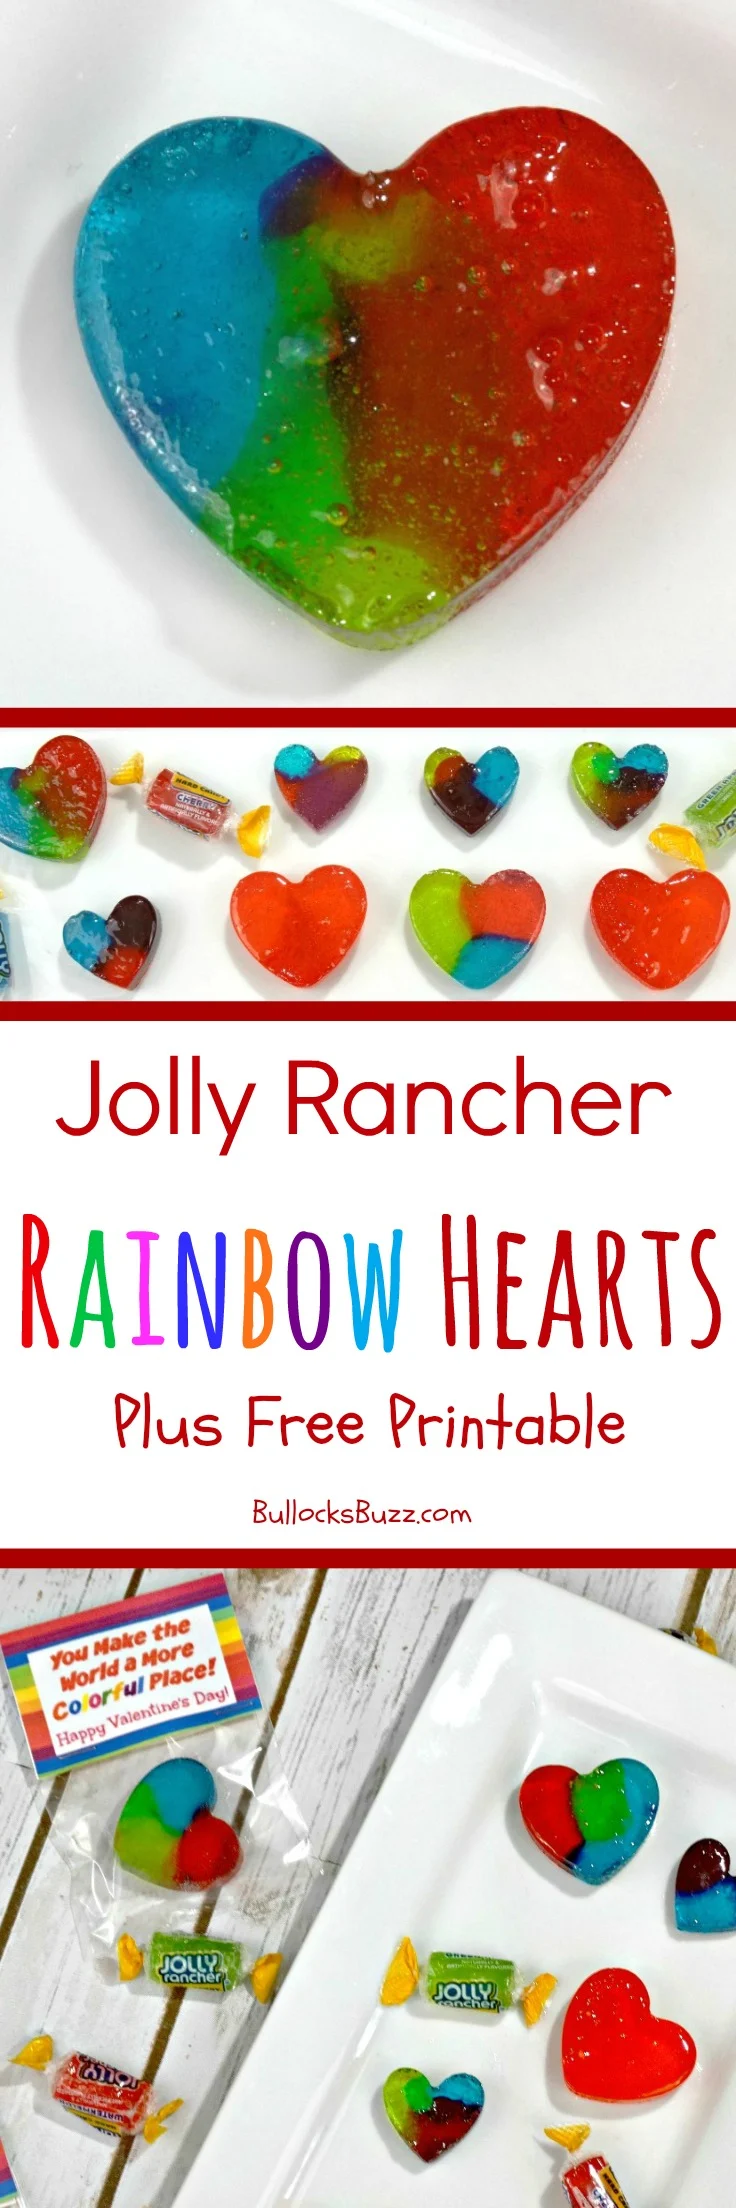 These delicious and colorful homemade candy hearts are the perfect Valentine's Day treat! Combine these Jolly Rancher homemade Rainbow Hearts Candy with my free printable Valentine's Day Treat Bag Topper for an adorable Valentine that just can't be beat! #ValentinesDay #recipes #homemadecandy #DIYcandy